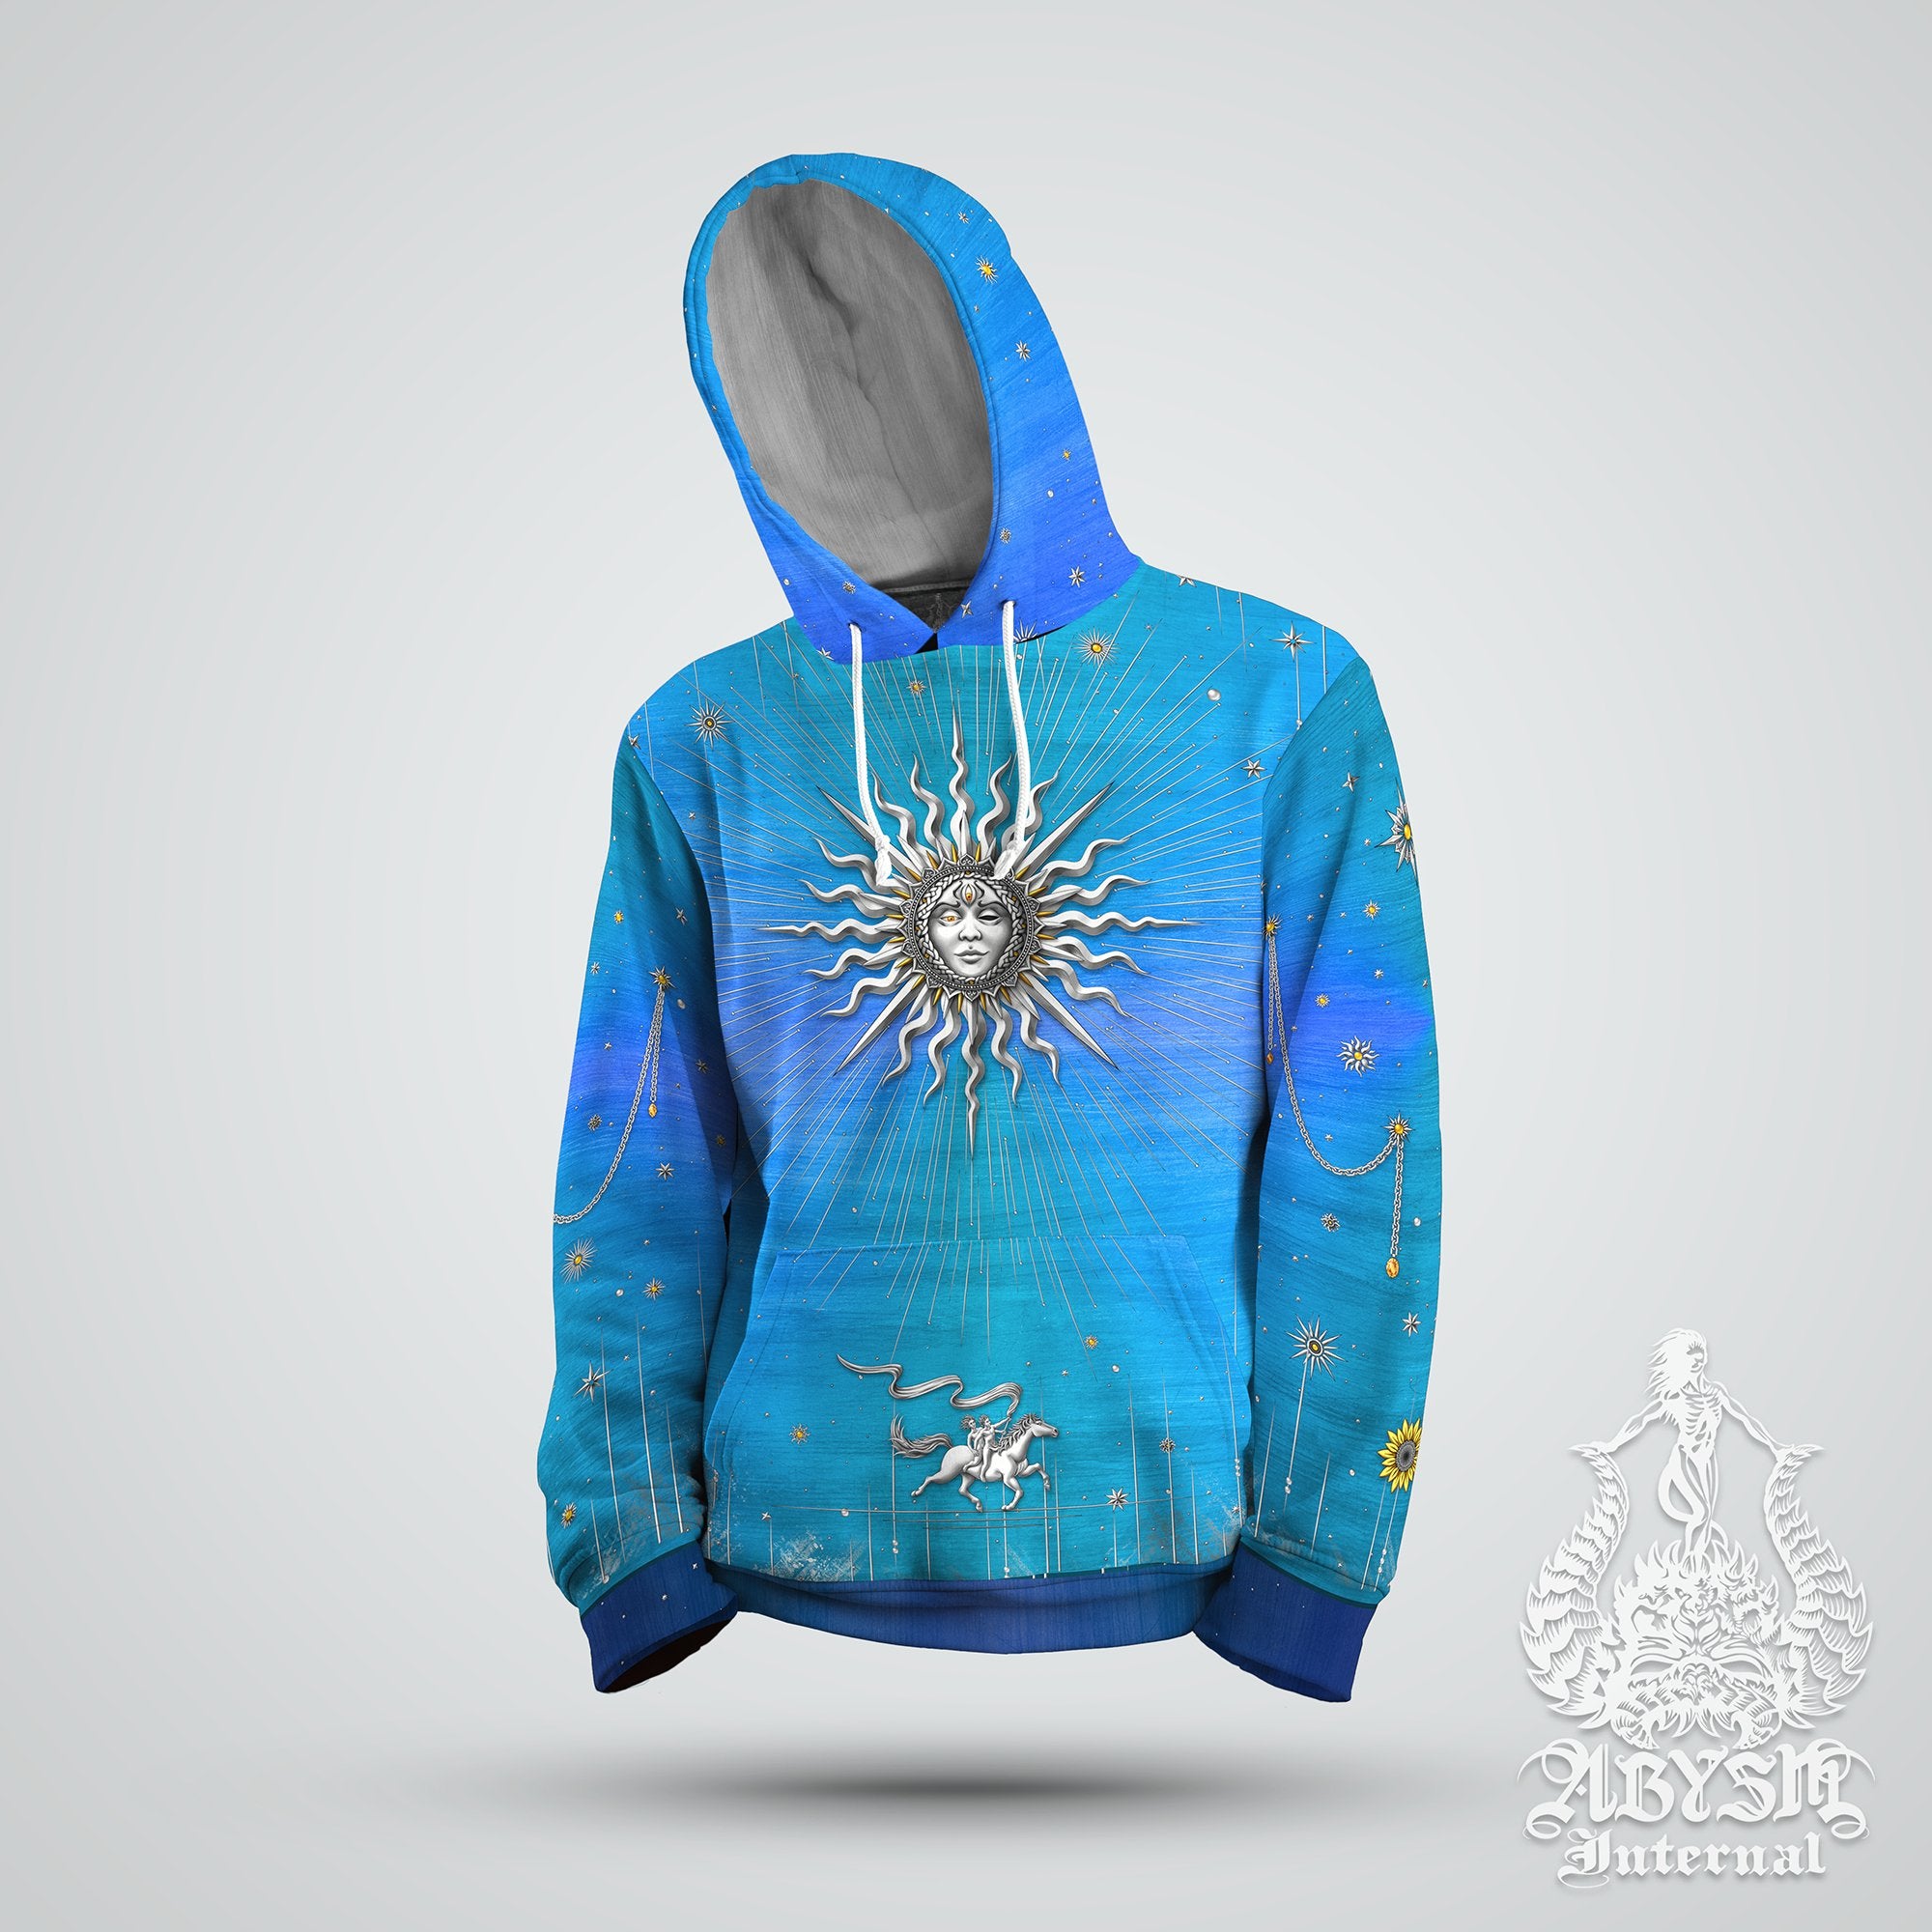 Silver Sun Hoodie, Tarot Arcana Pullover, Boho Sweater, Magic Street Outfit, Positive Streetwear, Indie Clothing, Good Fortune, Unisex - 7 Colors - Abysm Internal